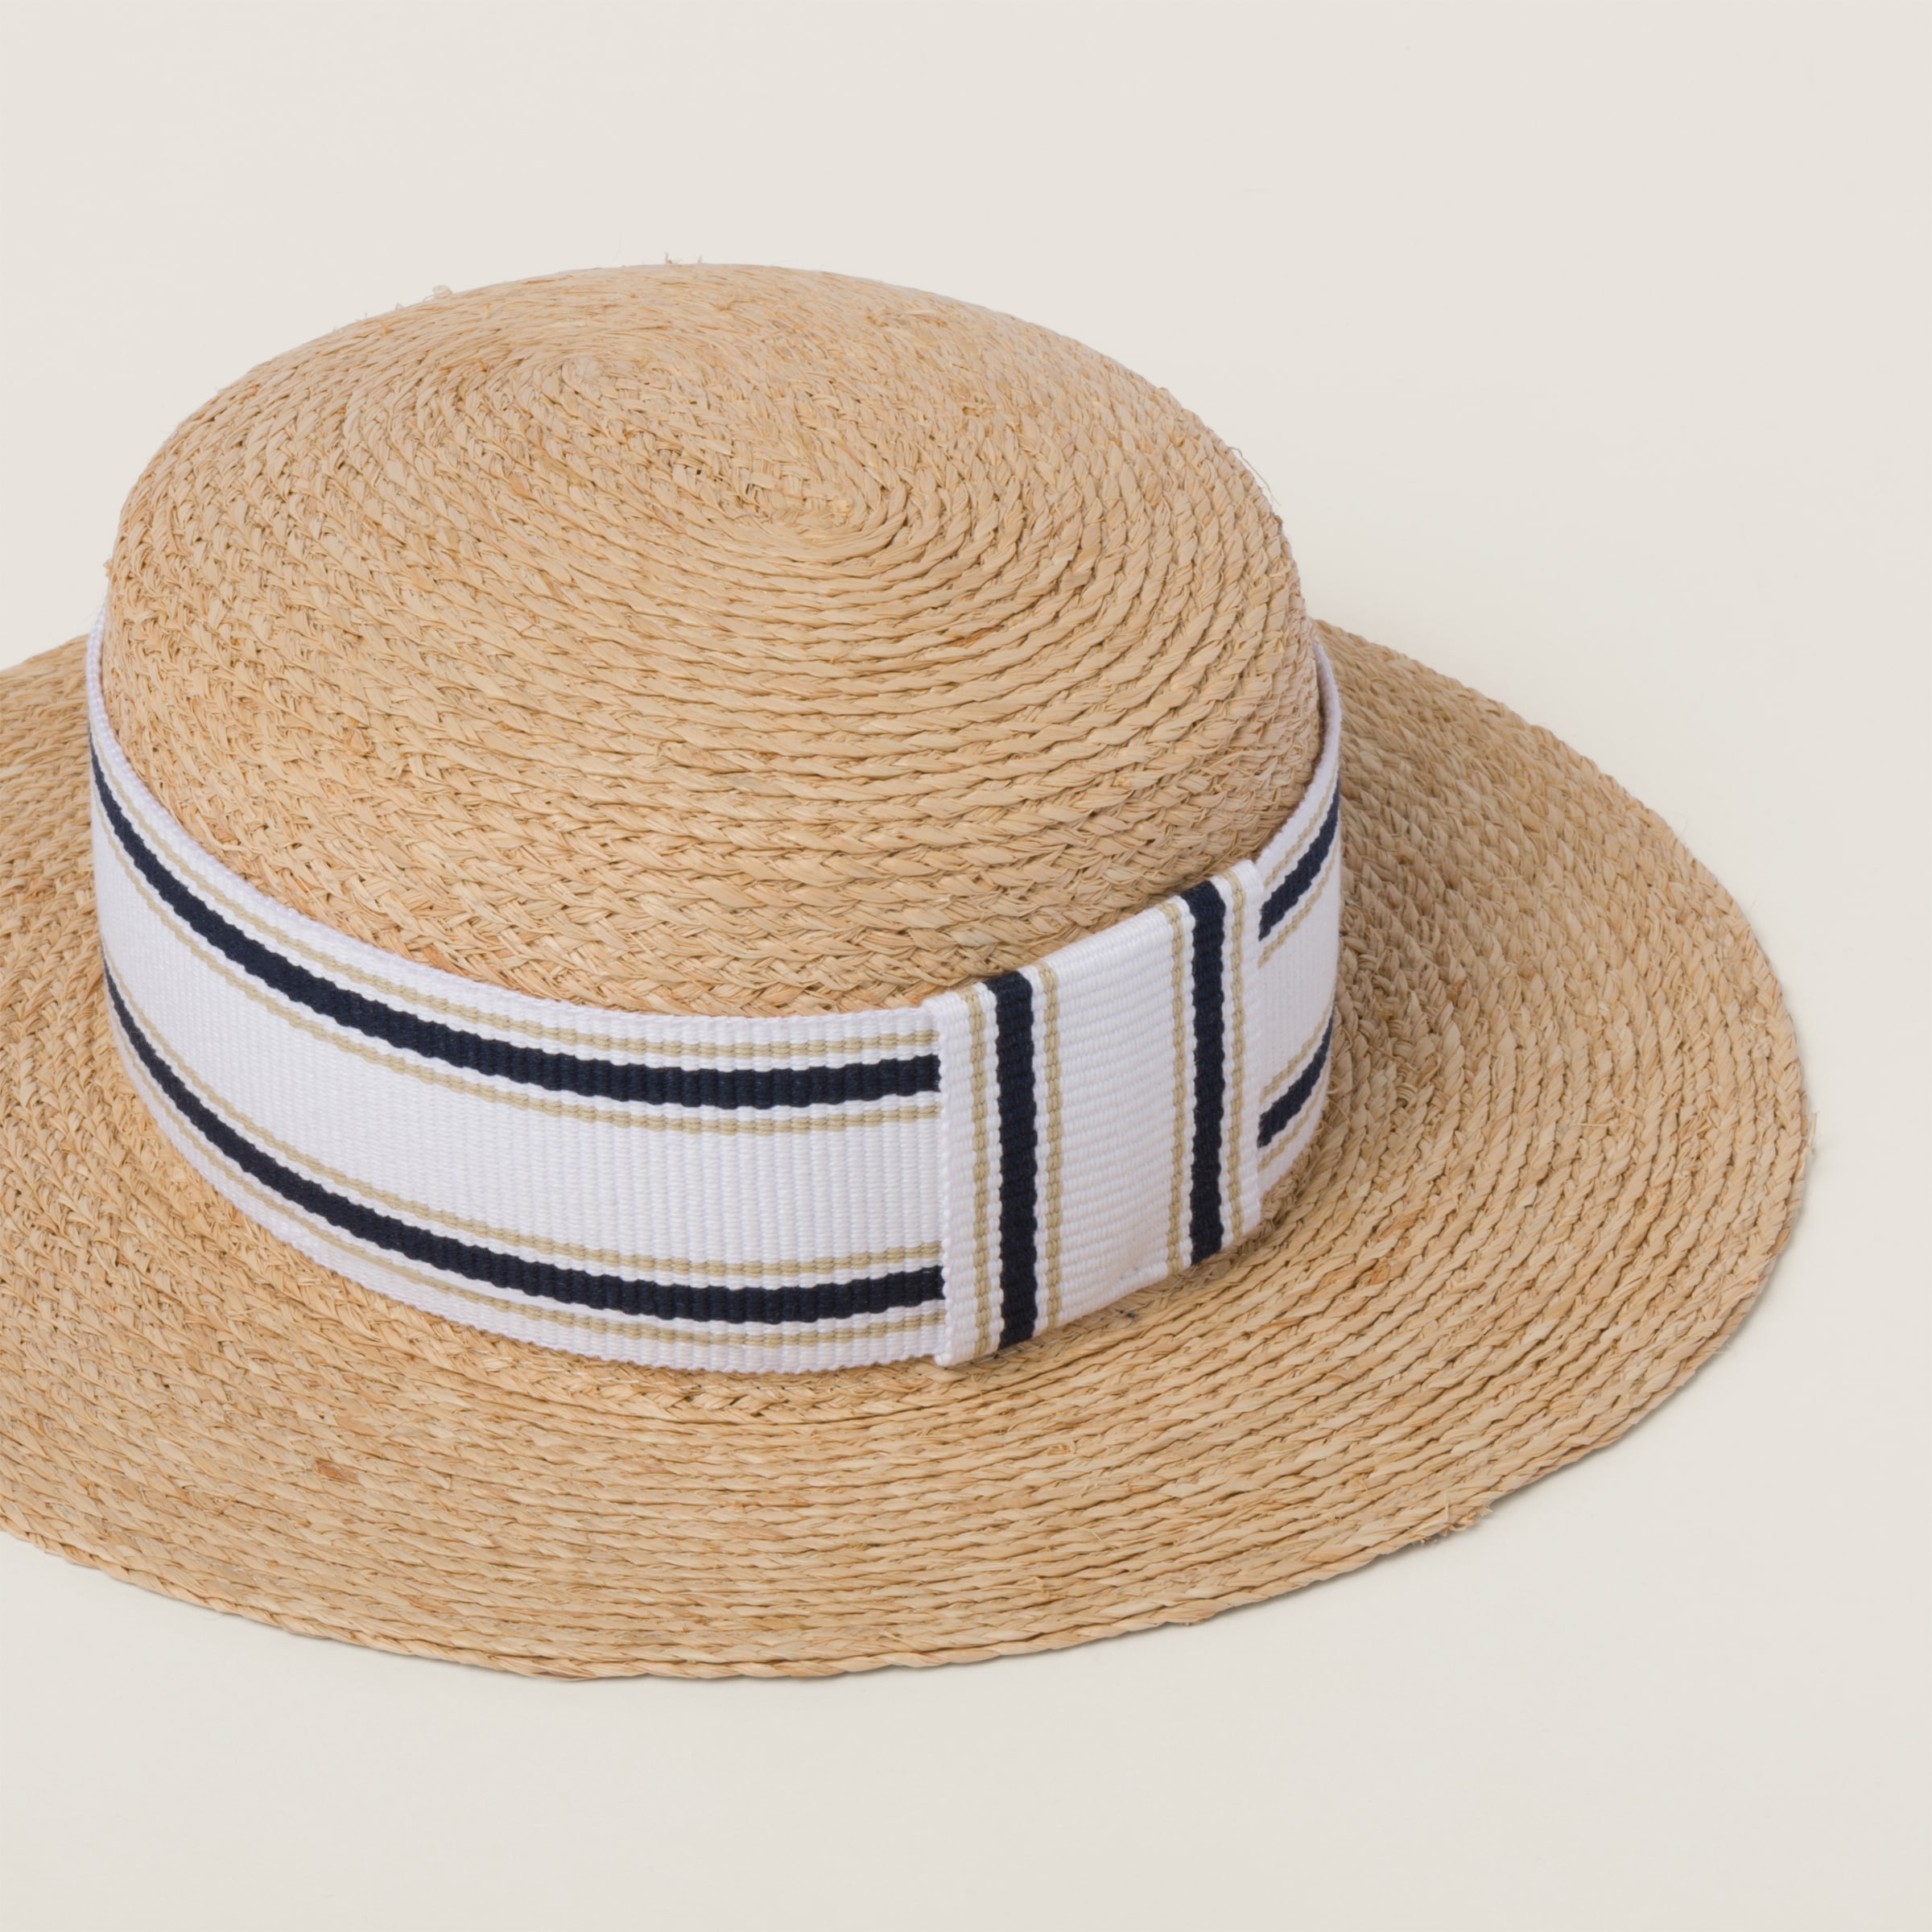 Woven fabric hat - 2